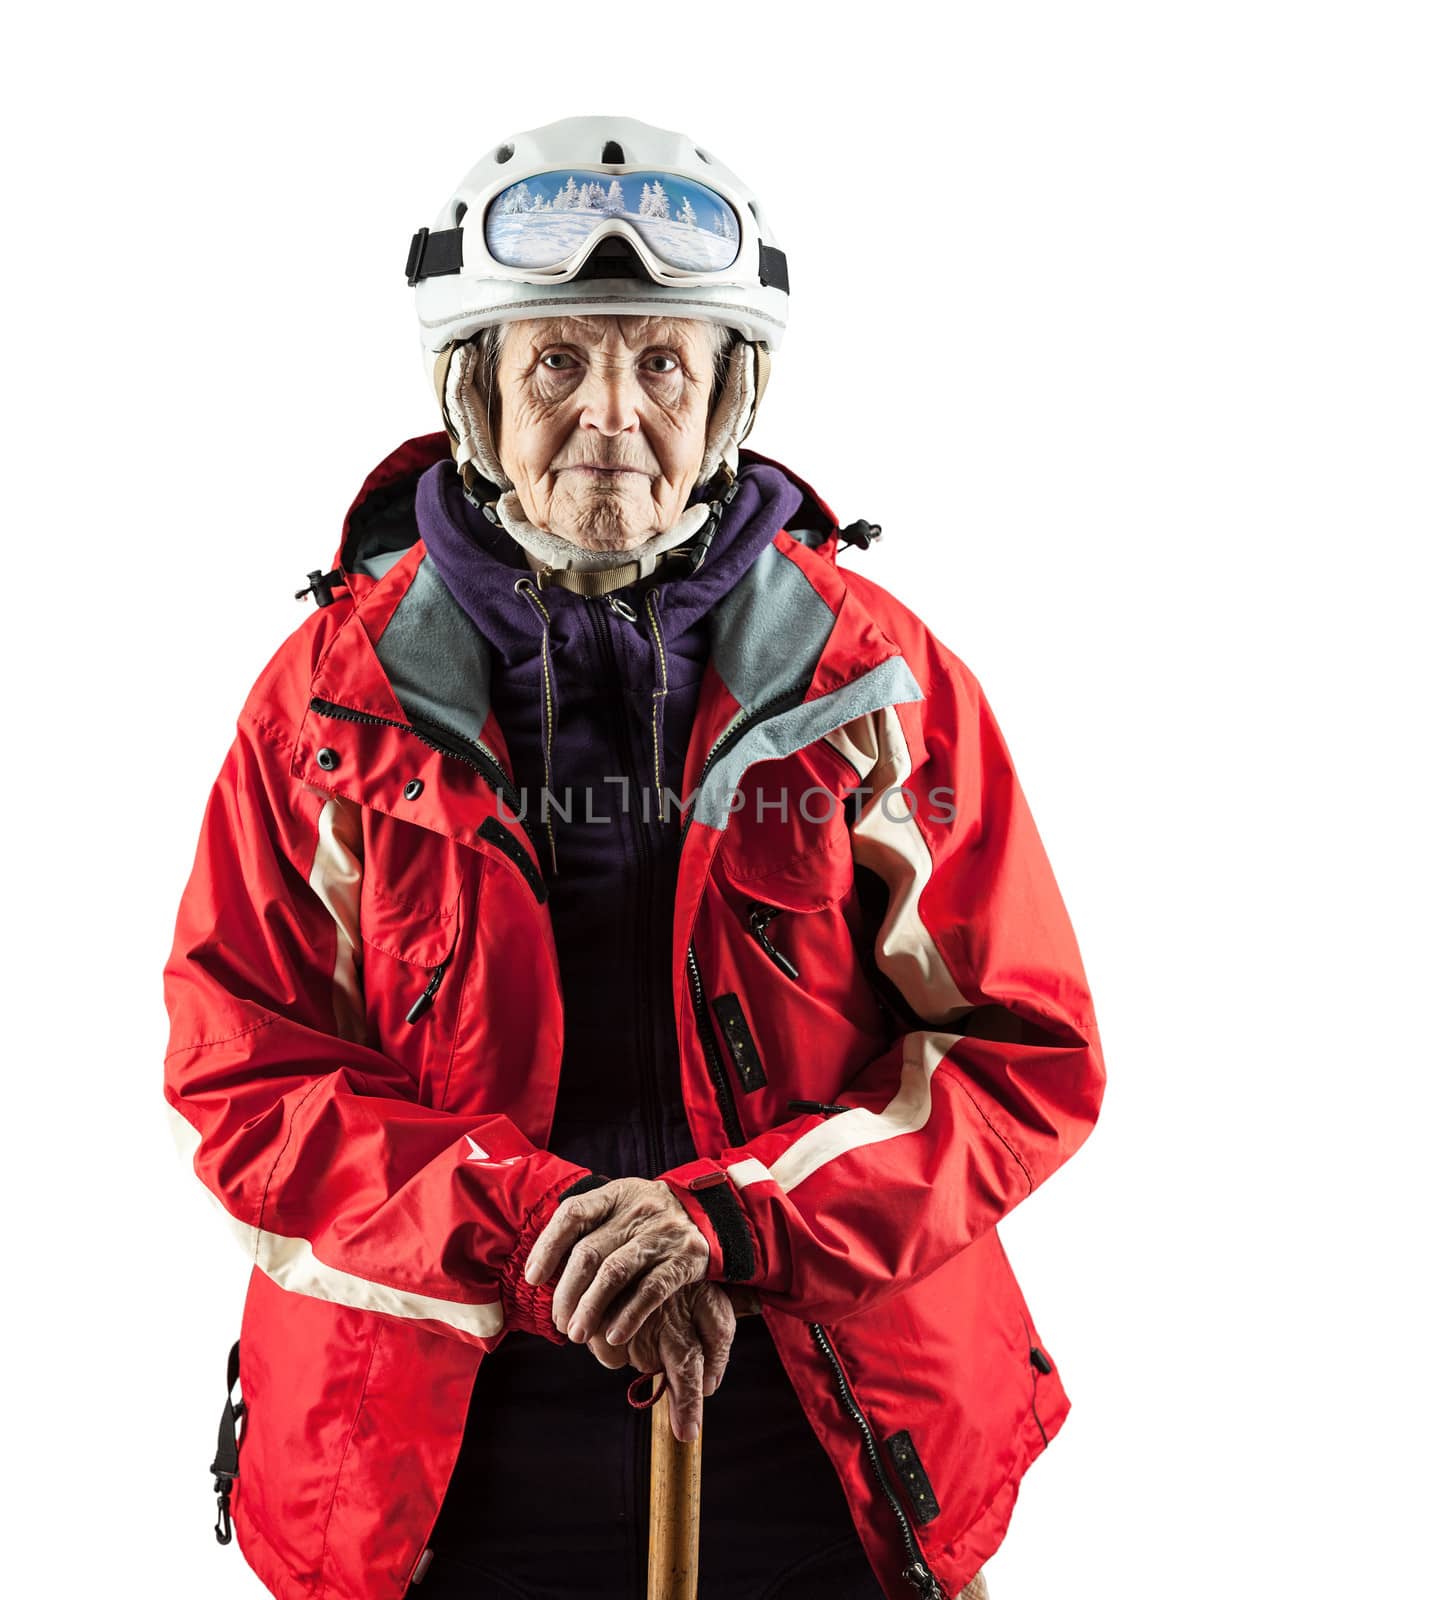 Senior woman in ski jacket and helmet over white by photobac